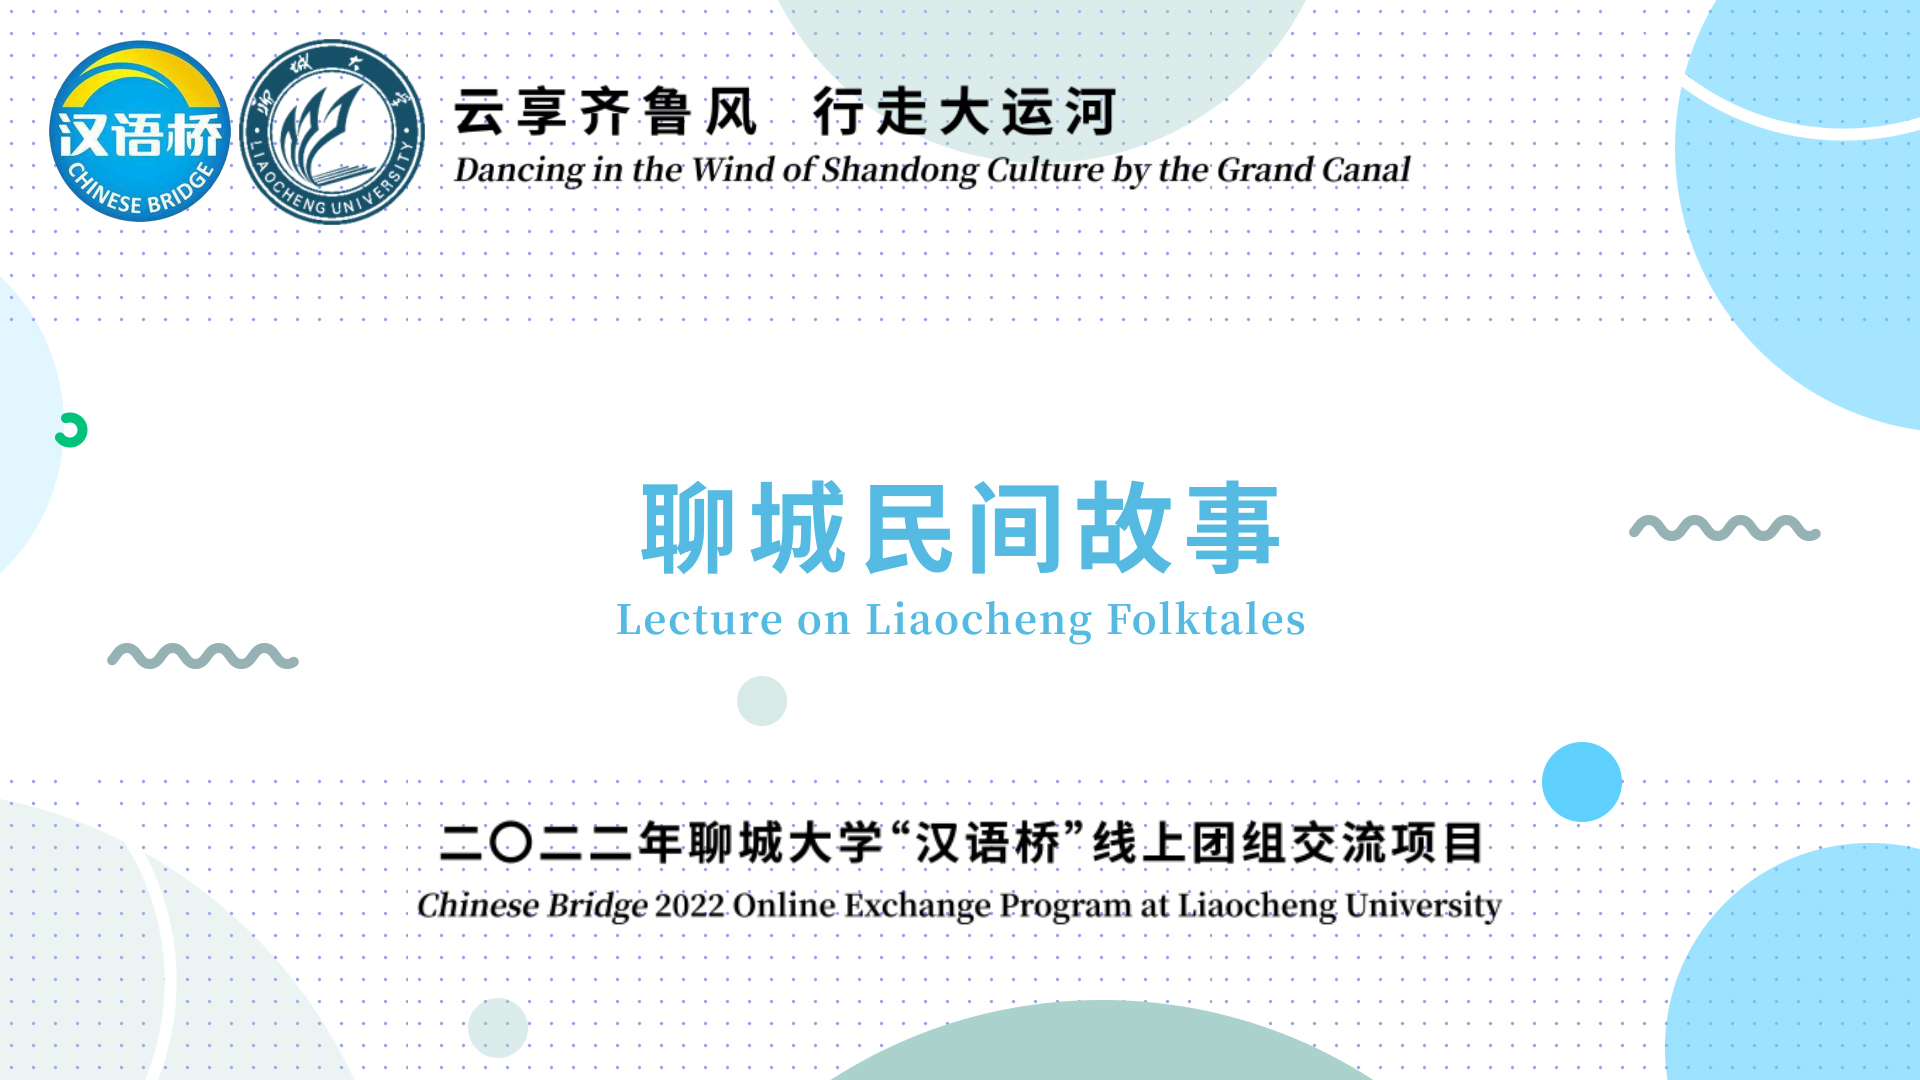 Lecture on Liaocheng Folktales